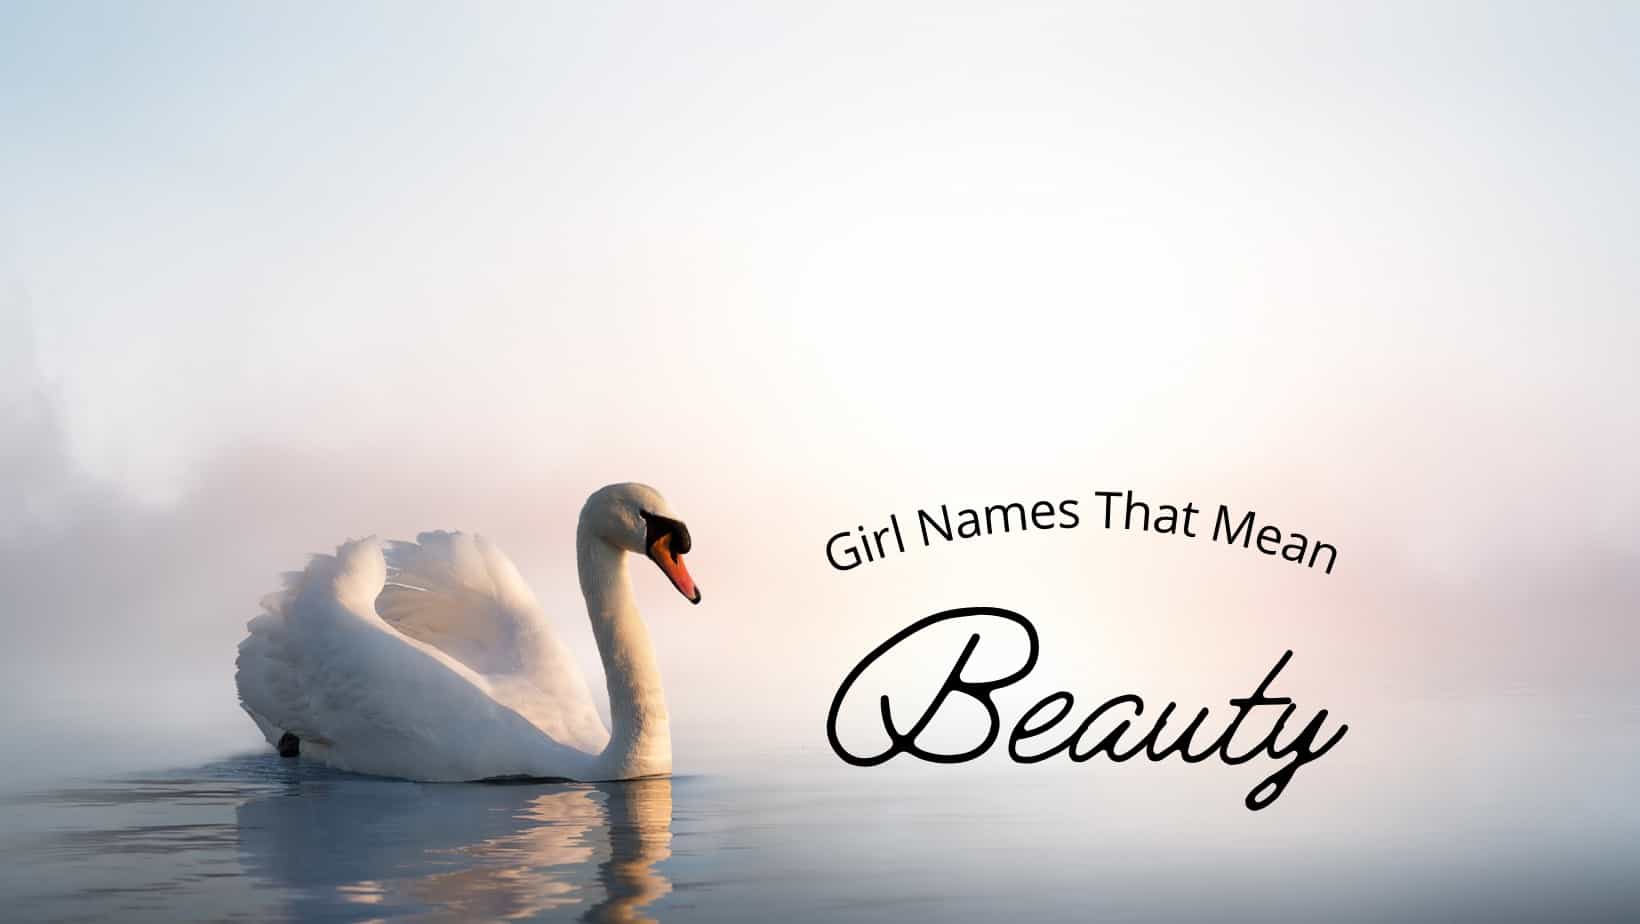 Girl Names That Mean Beauty